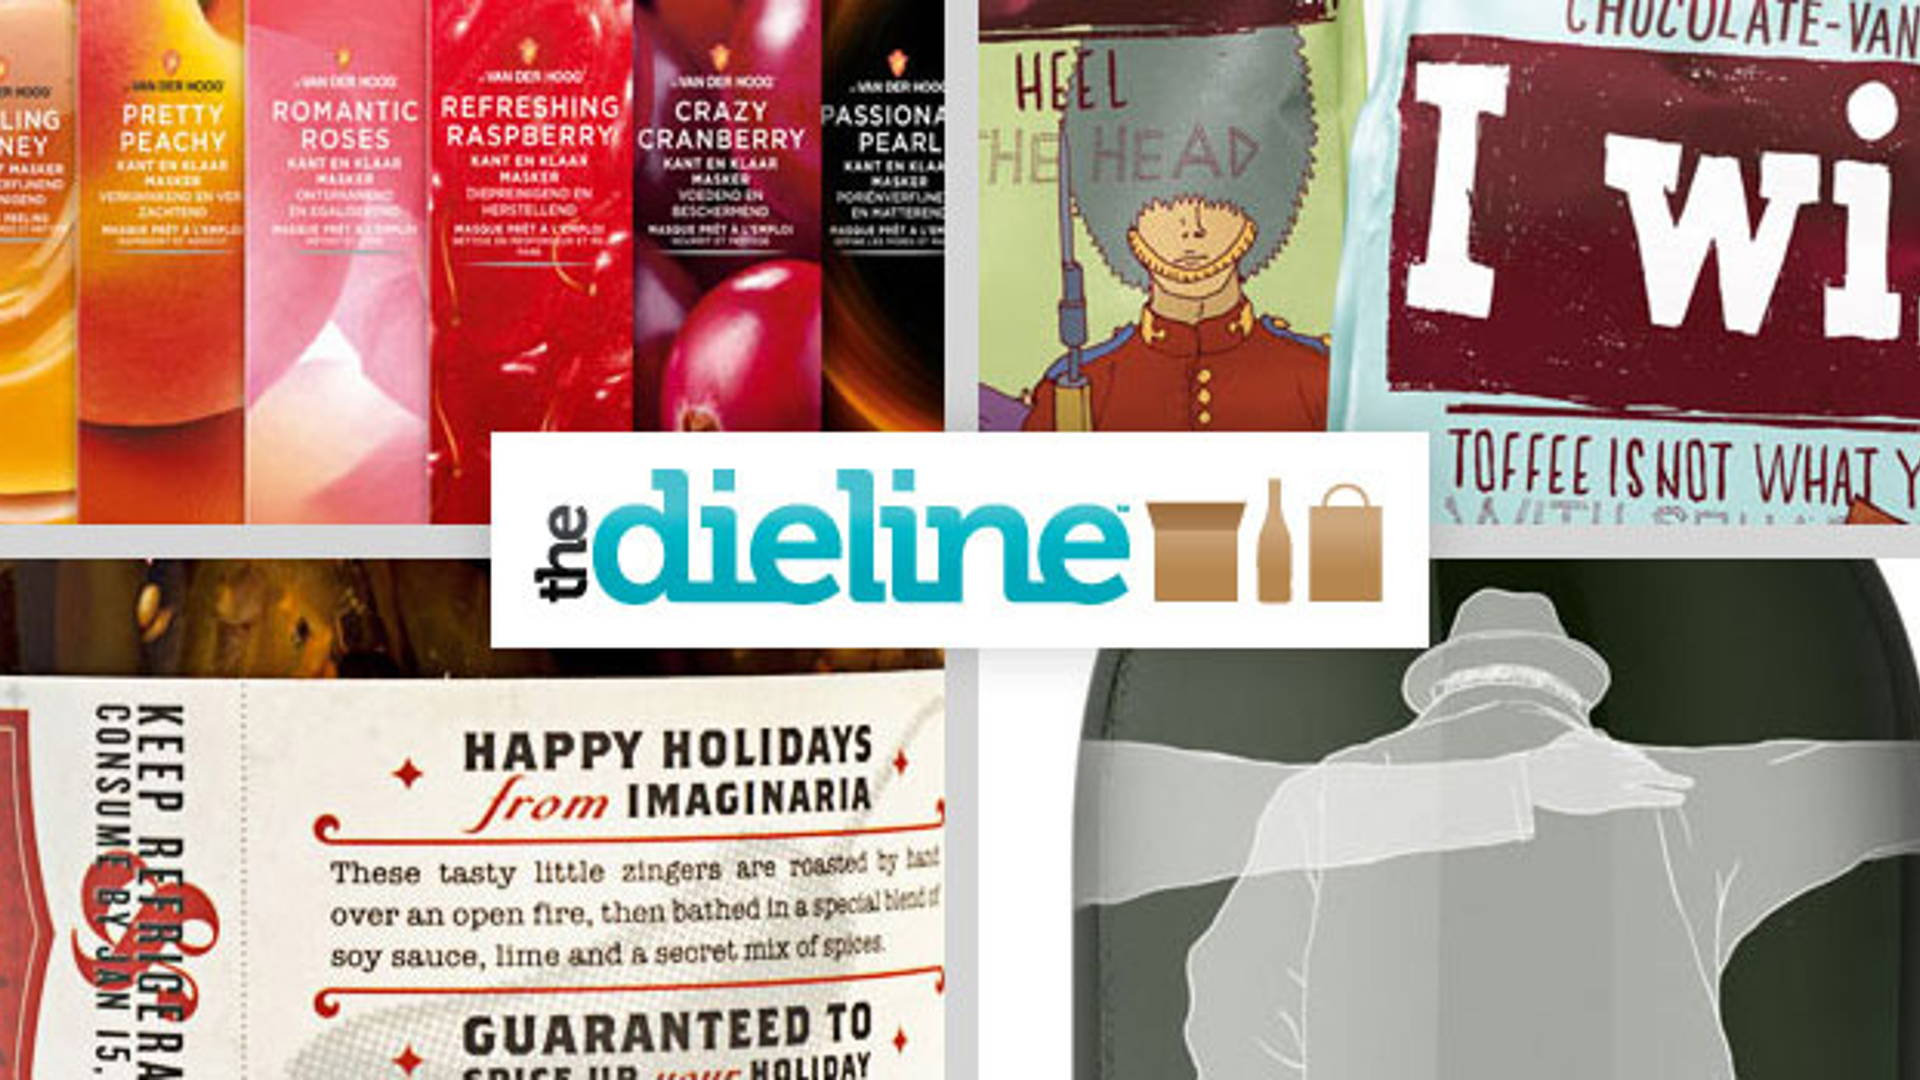 Featured image for This Week's Top 10 Articles on The Dieline